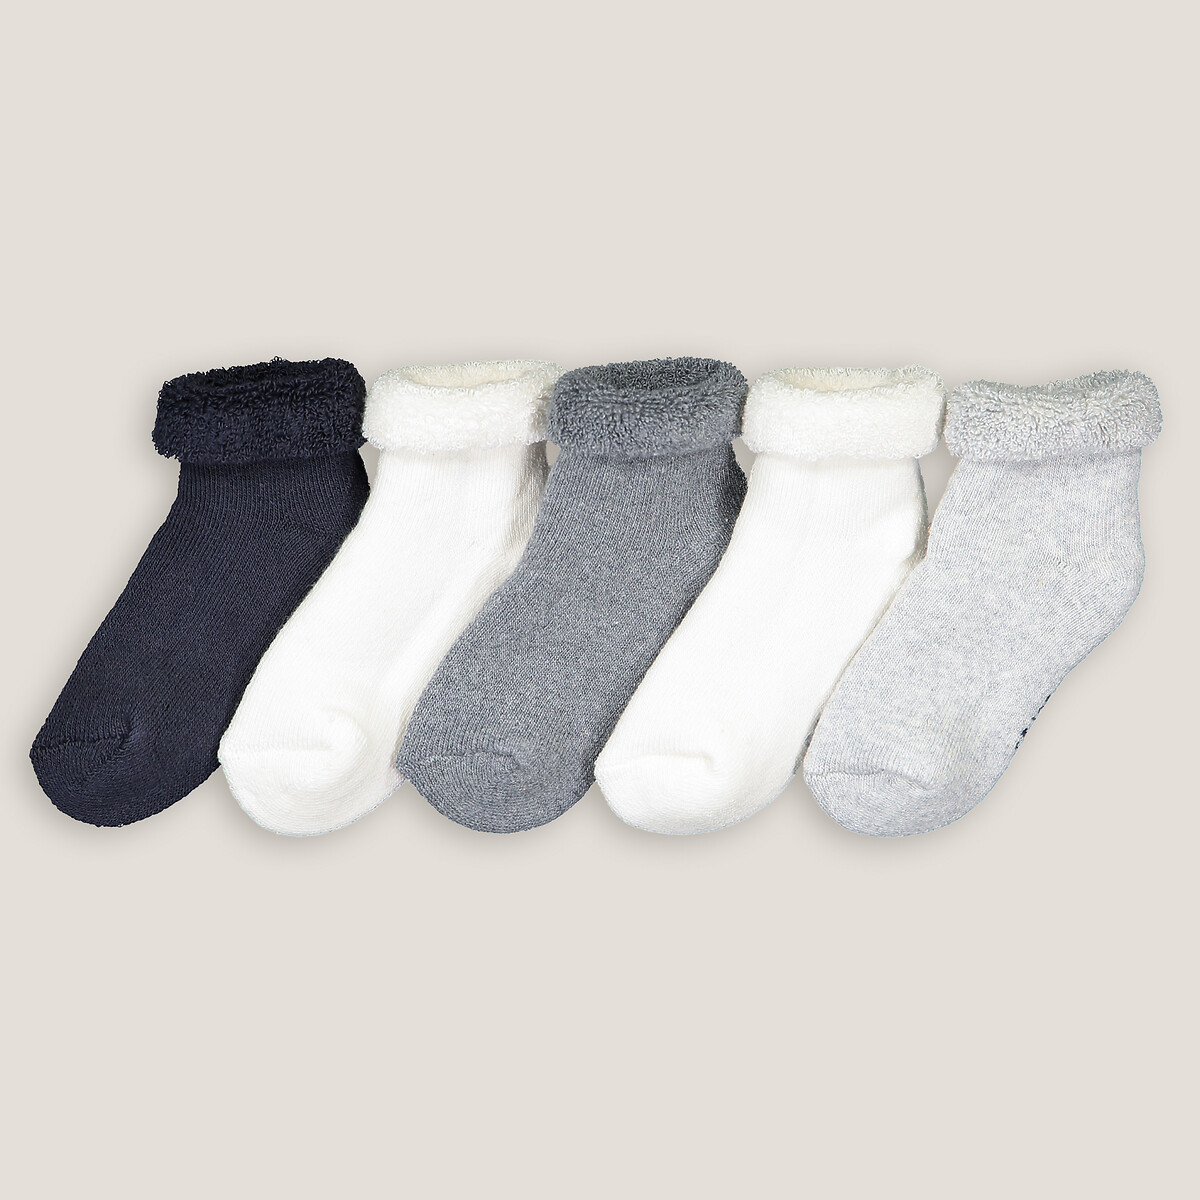 Pack of 5 Pairs of Boucle Socks in Cotton Mix